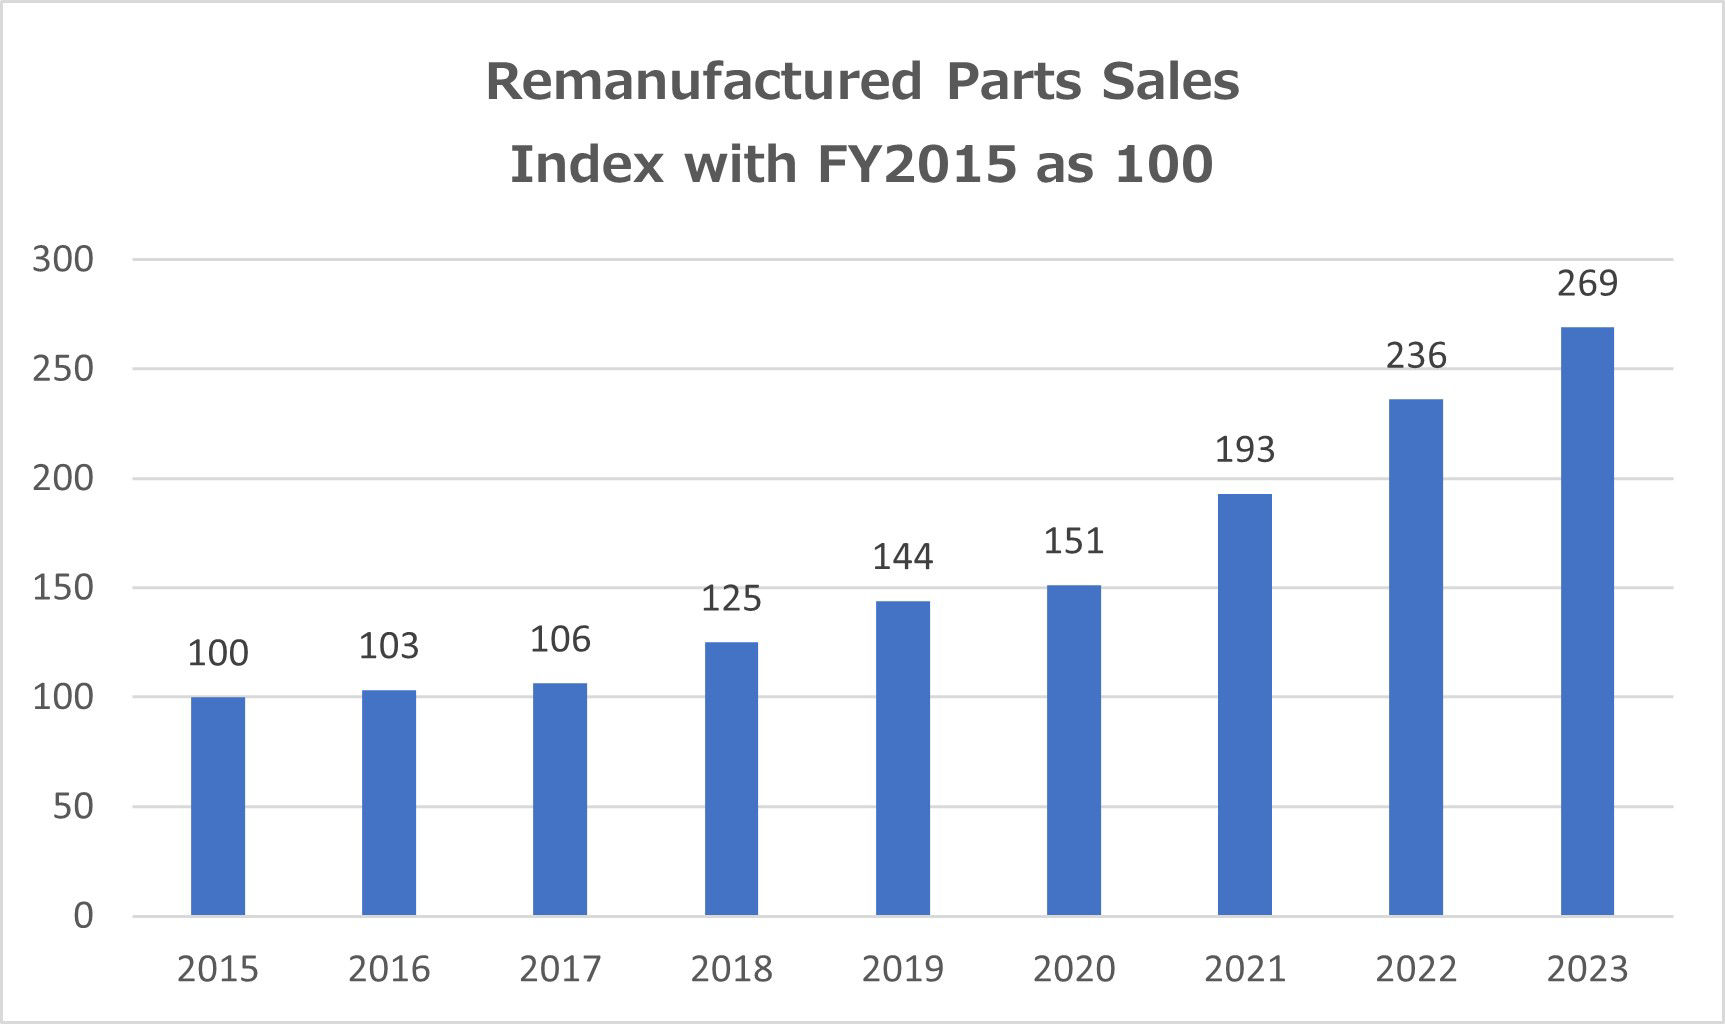 Remanufactured Parts Sales Index with FY2015 as 100